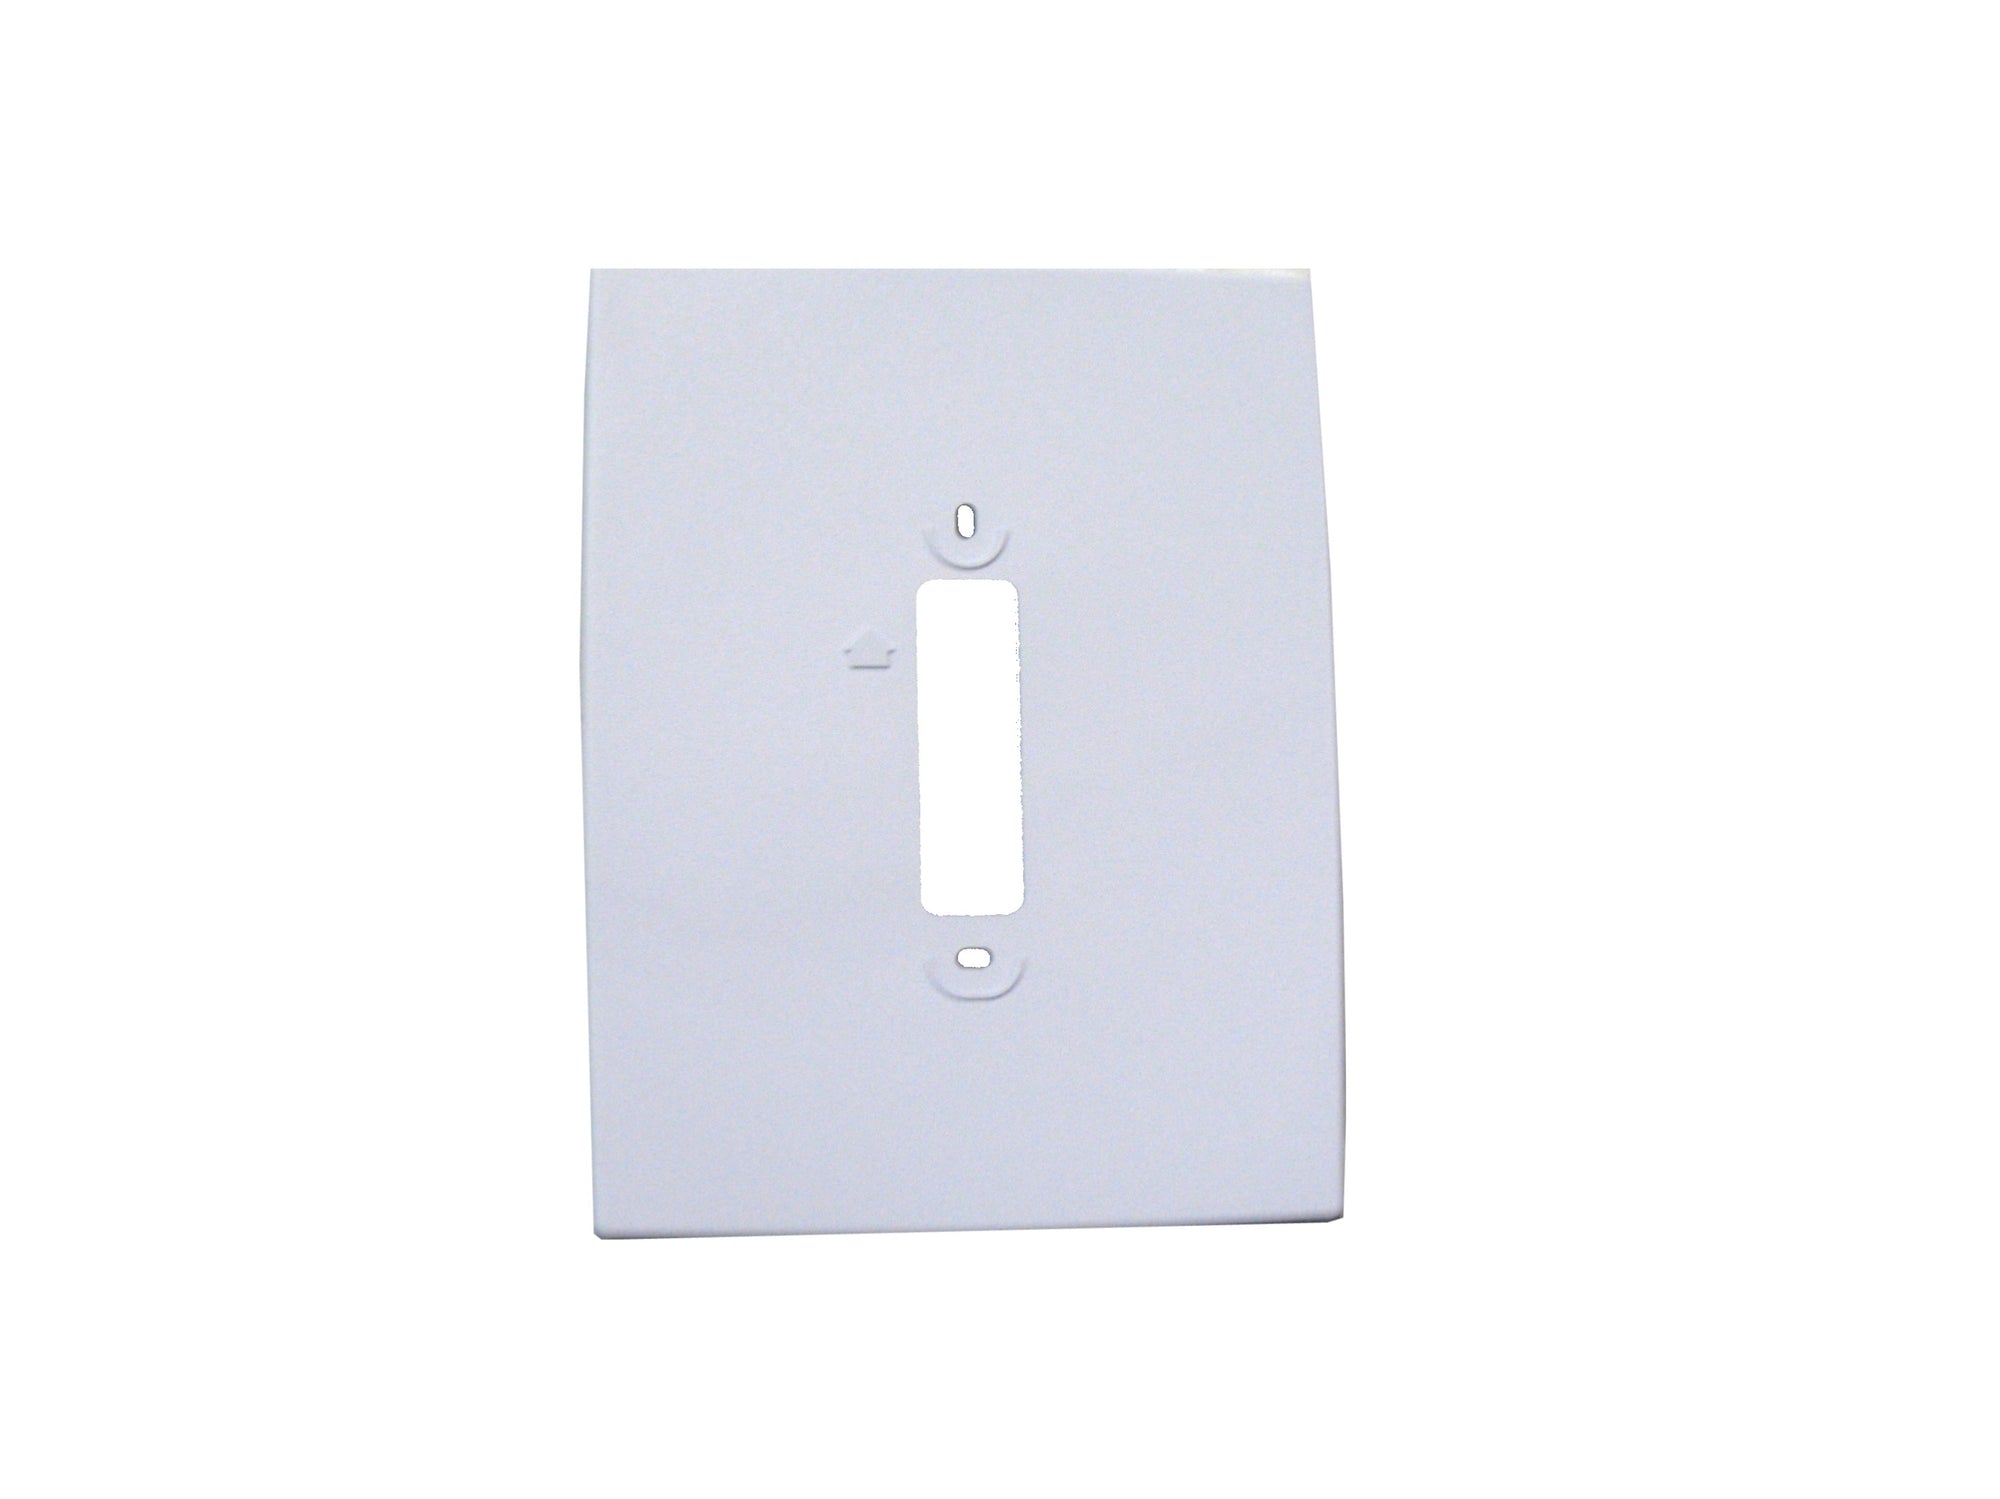 Honeywell WPPRO1000 Wall Plate for PRO 1000 and 2000 Series Thermostats